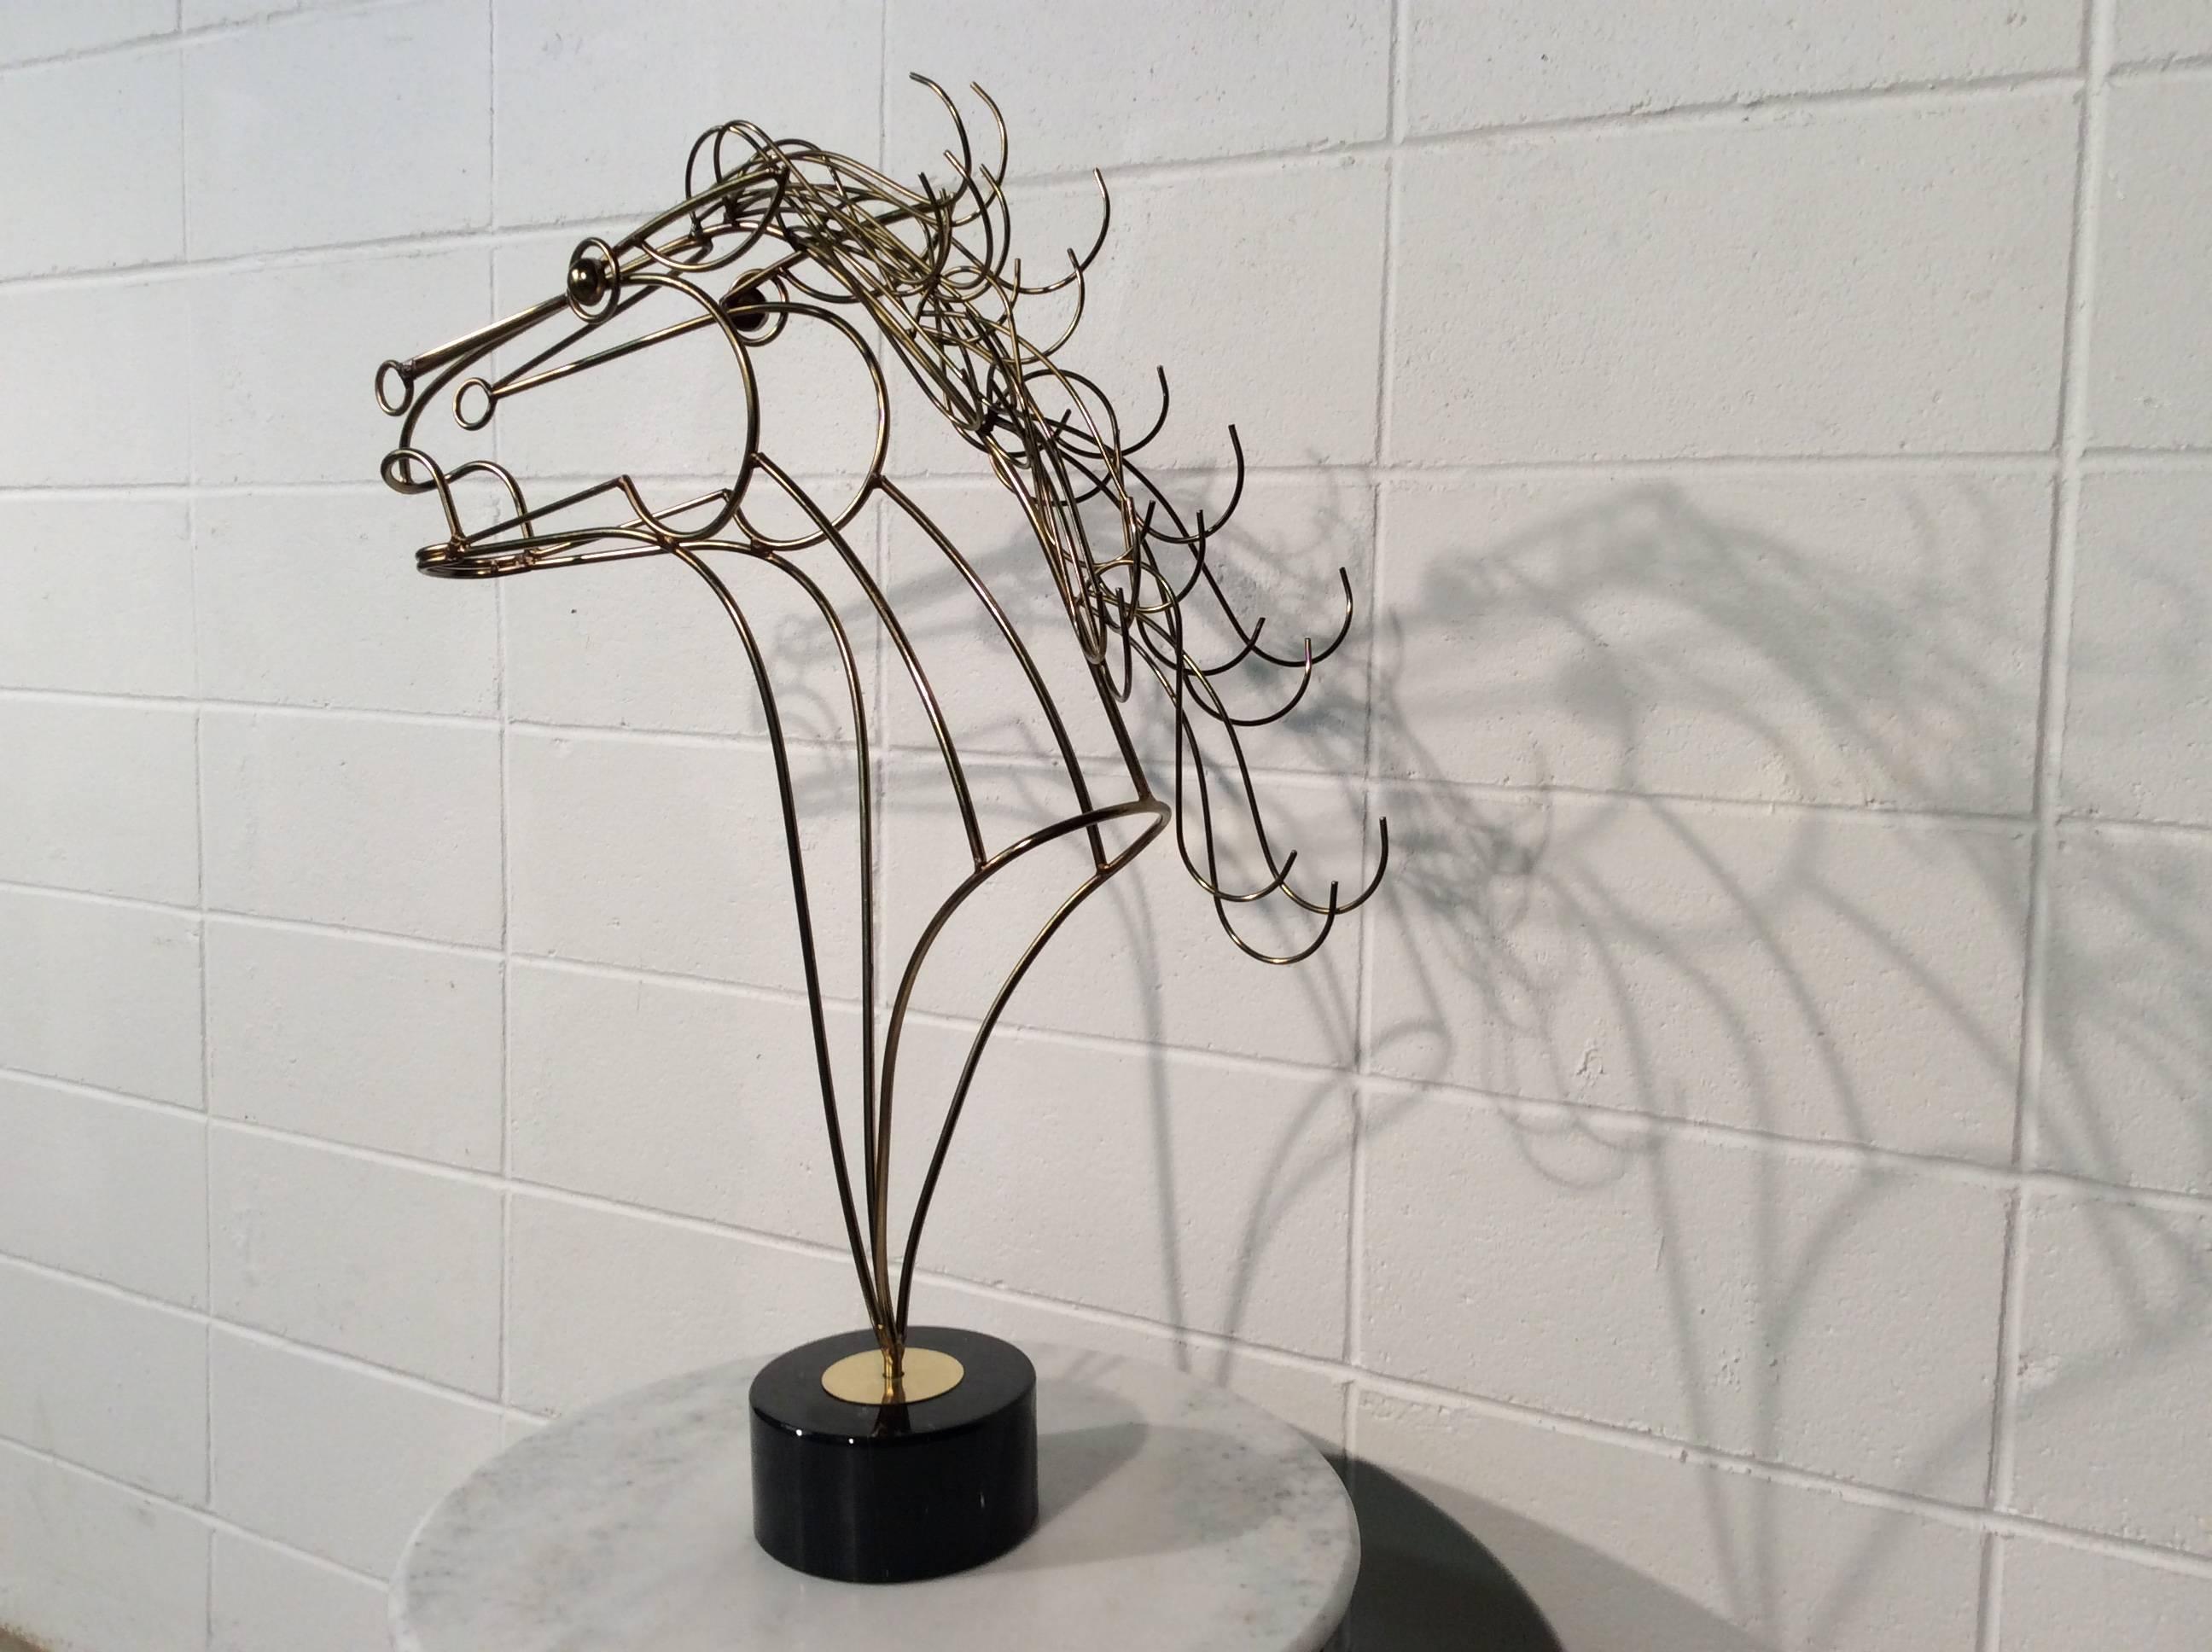 Large Mid-Century Modern C Jere wire horse sculpture on a black marble base.
At 29.25” tall this sculpture will be noticed in any room. Excellent condition.
No signature found which is not uncommon with Jere pieces. The construction and the marble